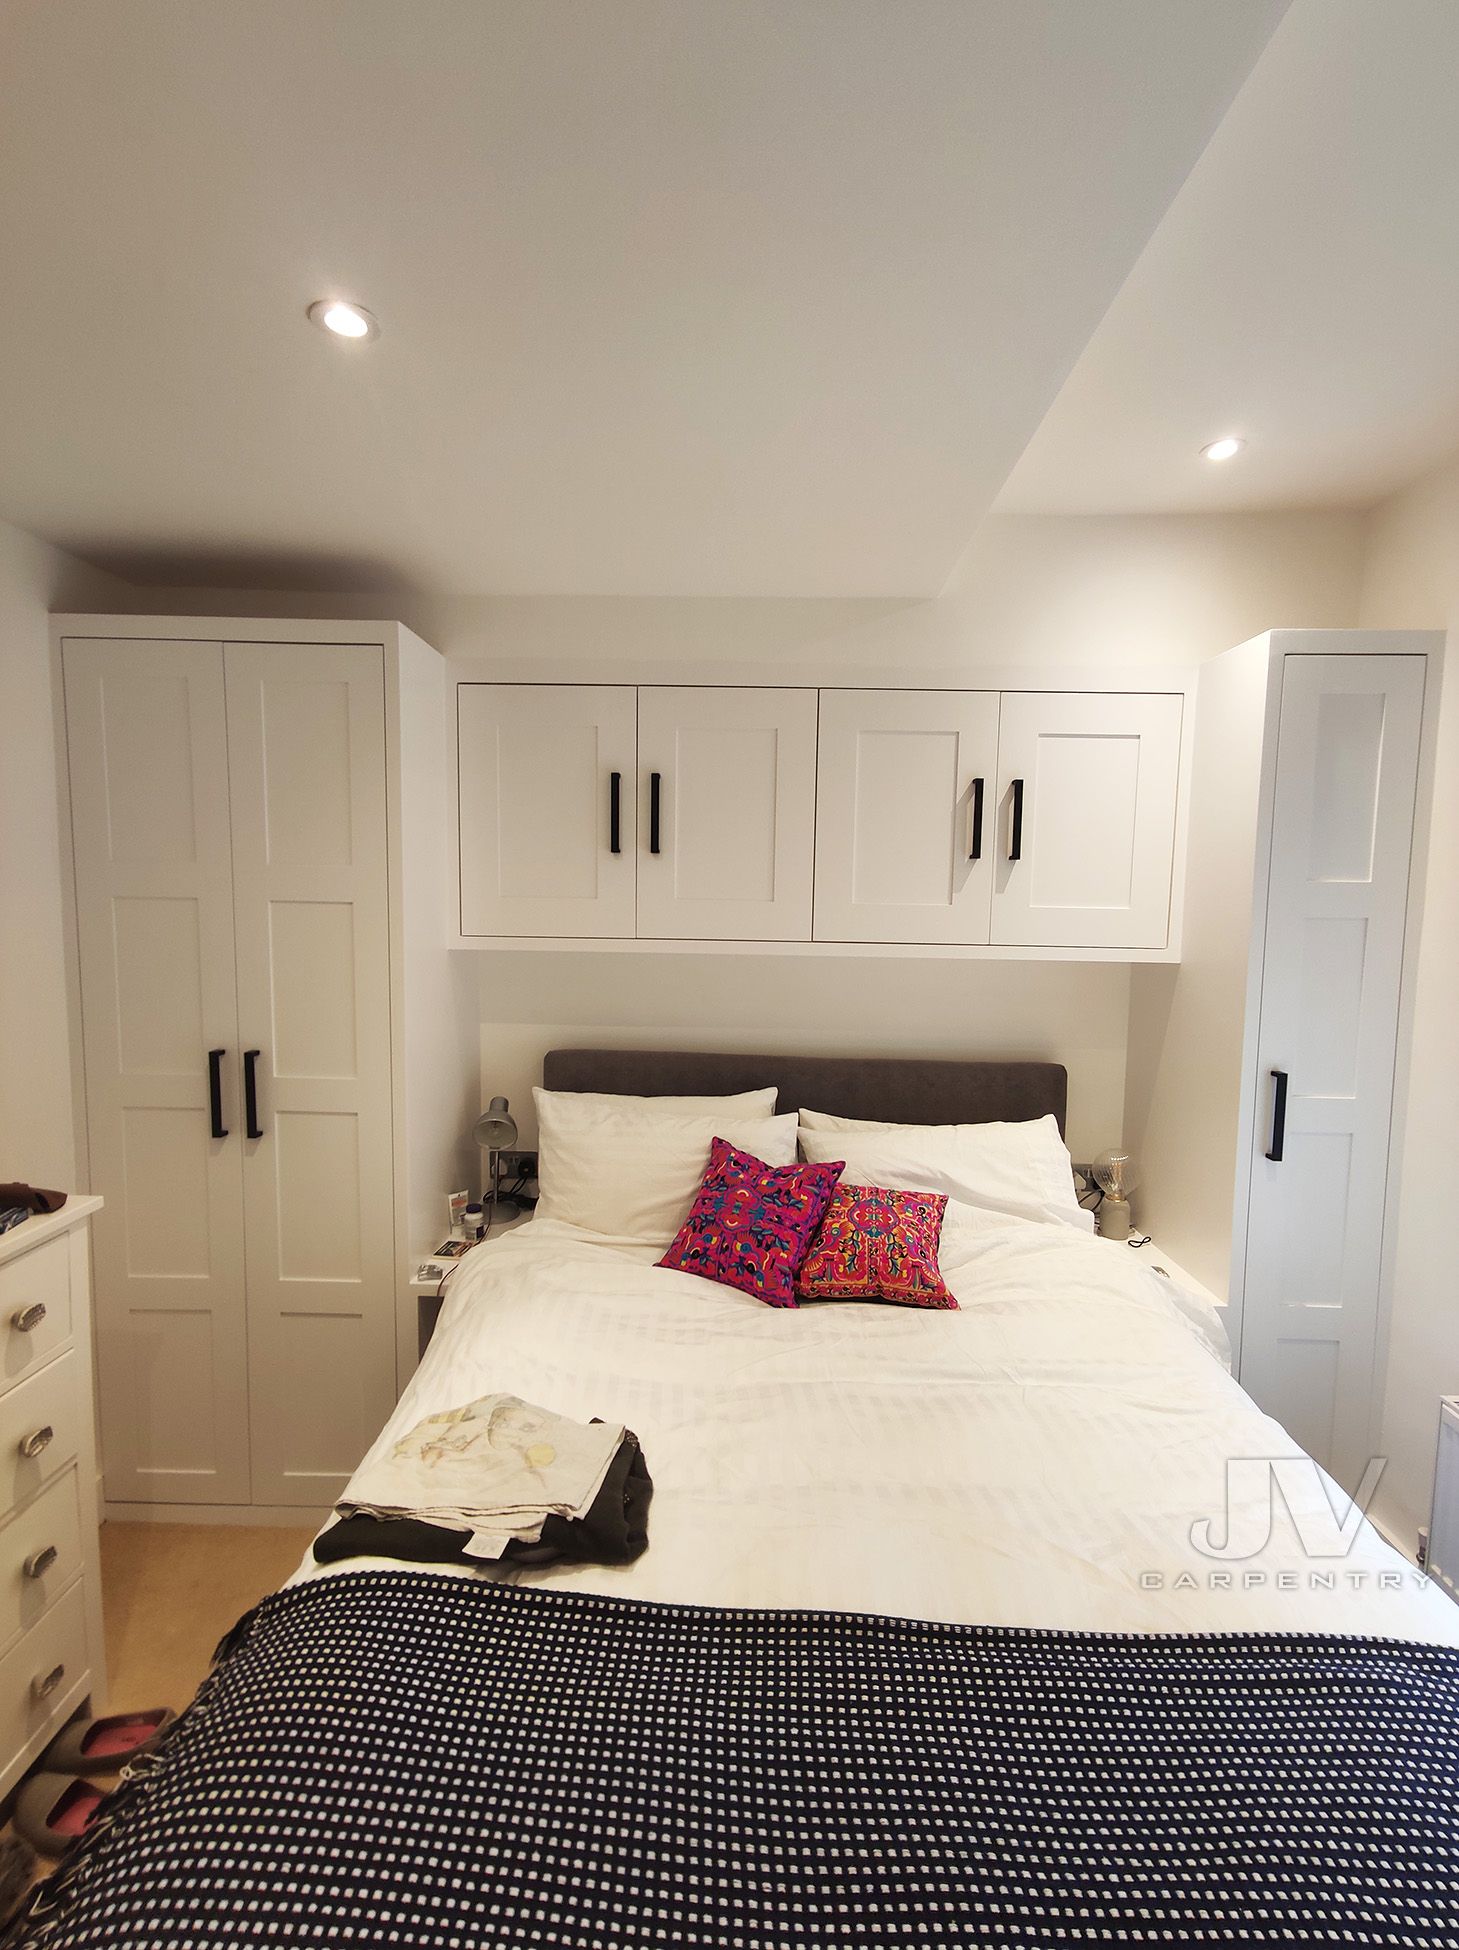 12 Fitted Wardrobes Over Bed Ideas For Your Bedroom | Jv Carpentry Pertaining To Over Bed Wardrobes Sets (View 5 of 15)